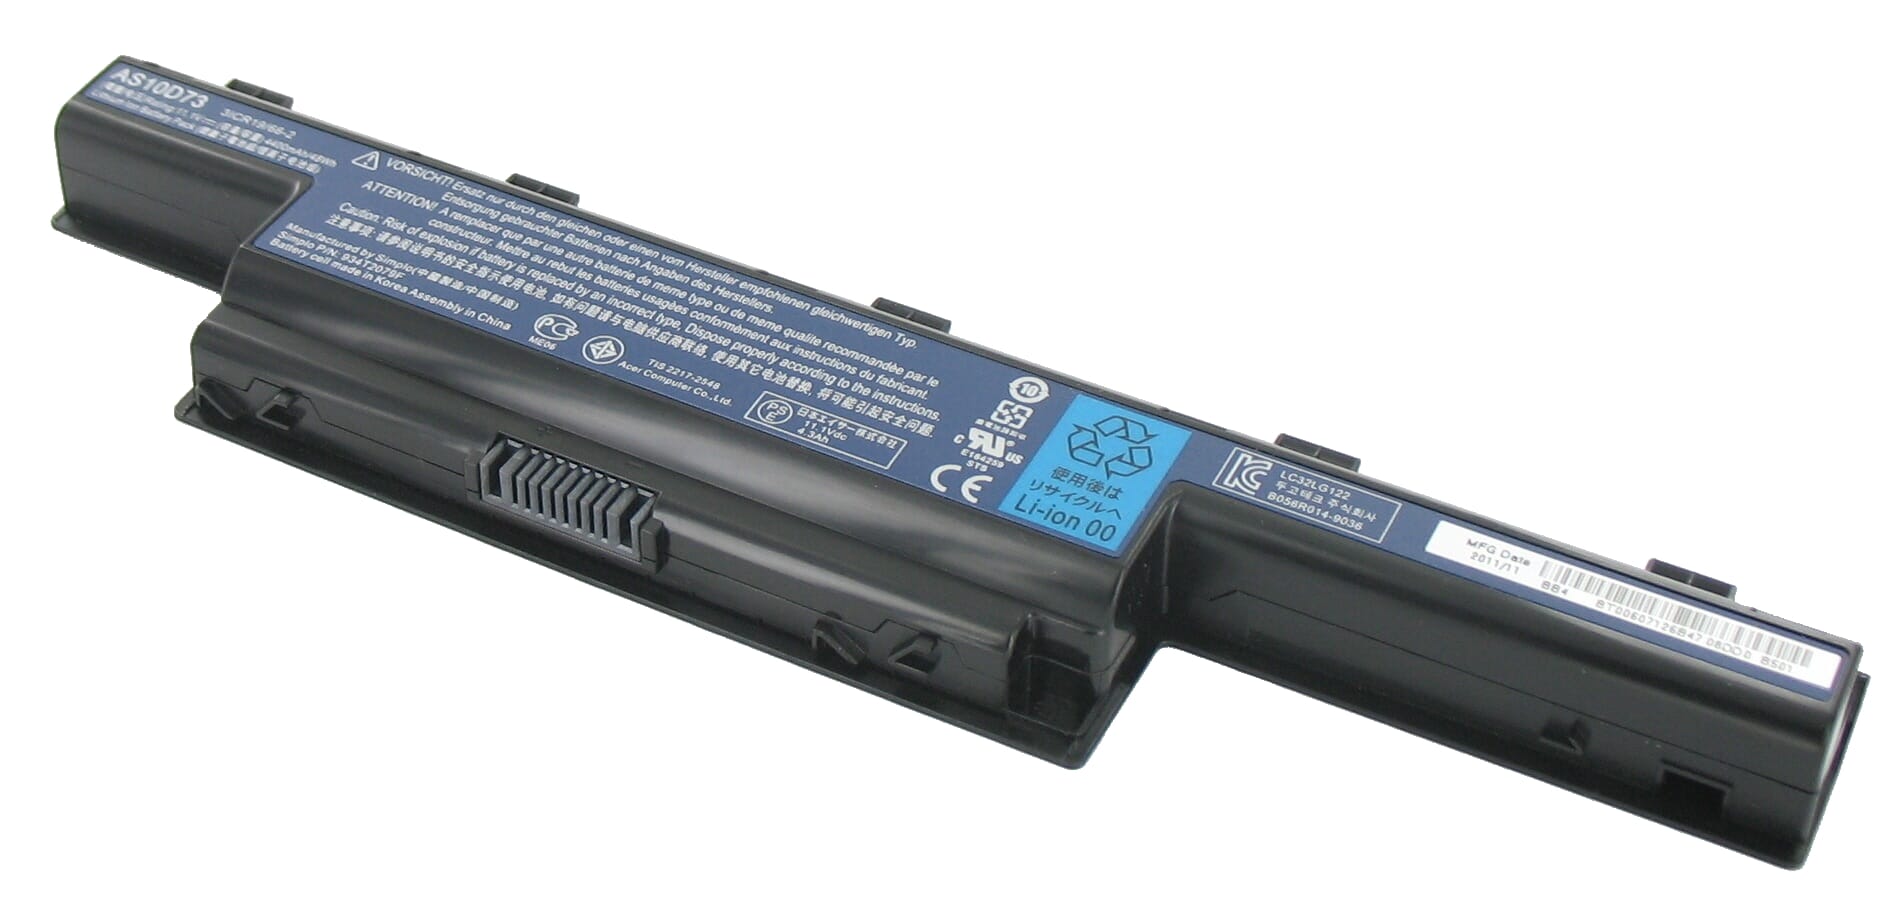 investering in tegenstelling tot rand Acer Laptop Accu 4400mAh voor Acer Aspire, Acer Travelmate, Packard Bell  (BT.00607.136) - ReplaceDirect.nl